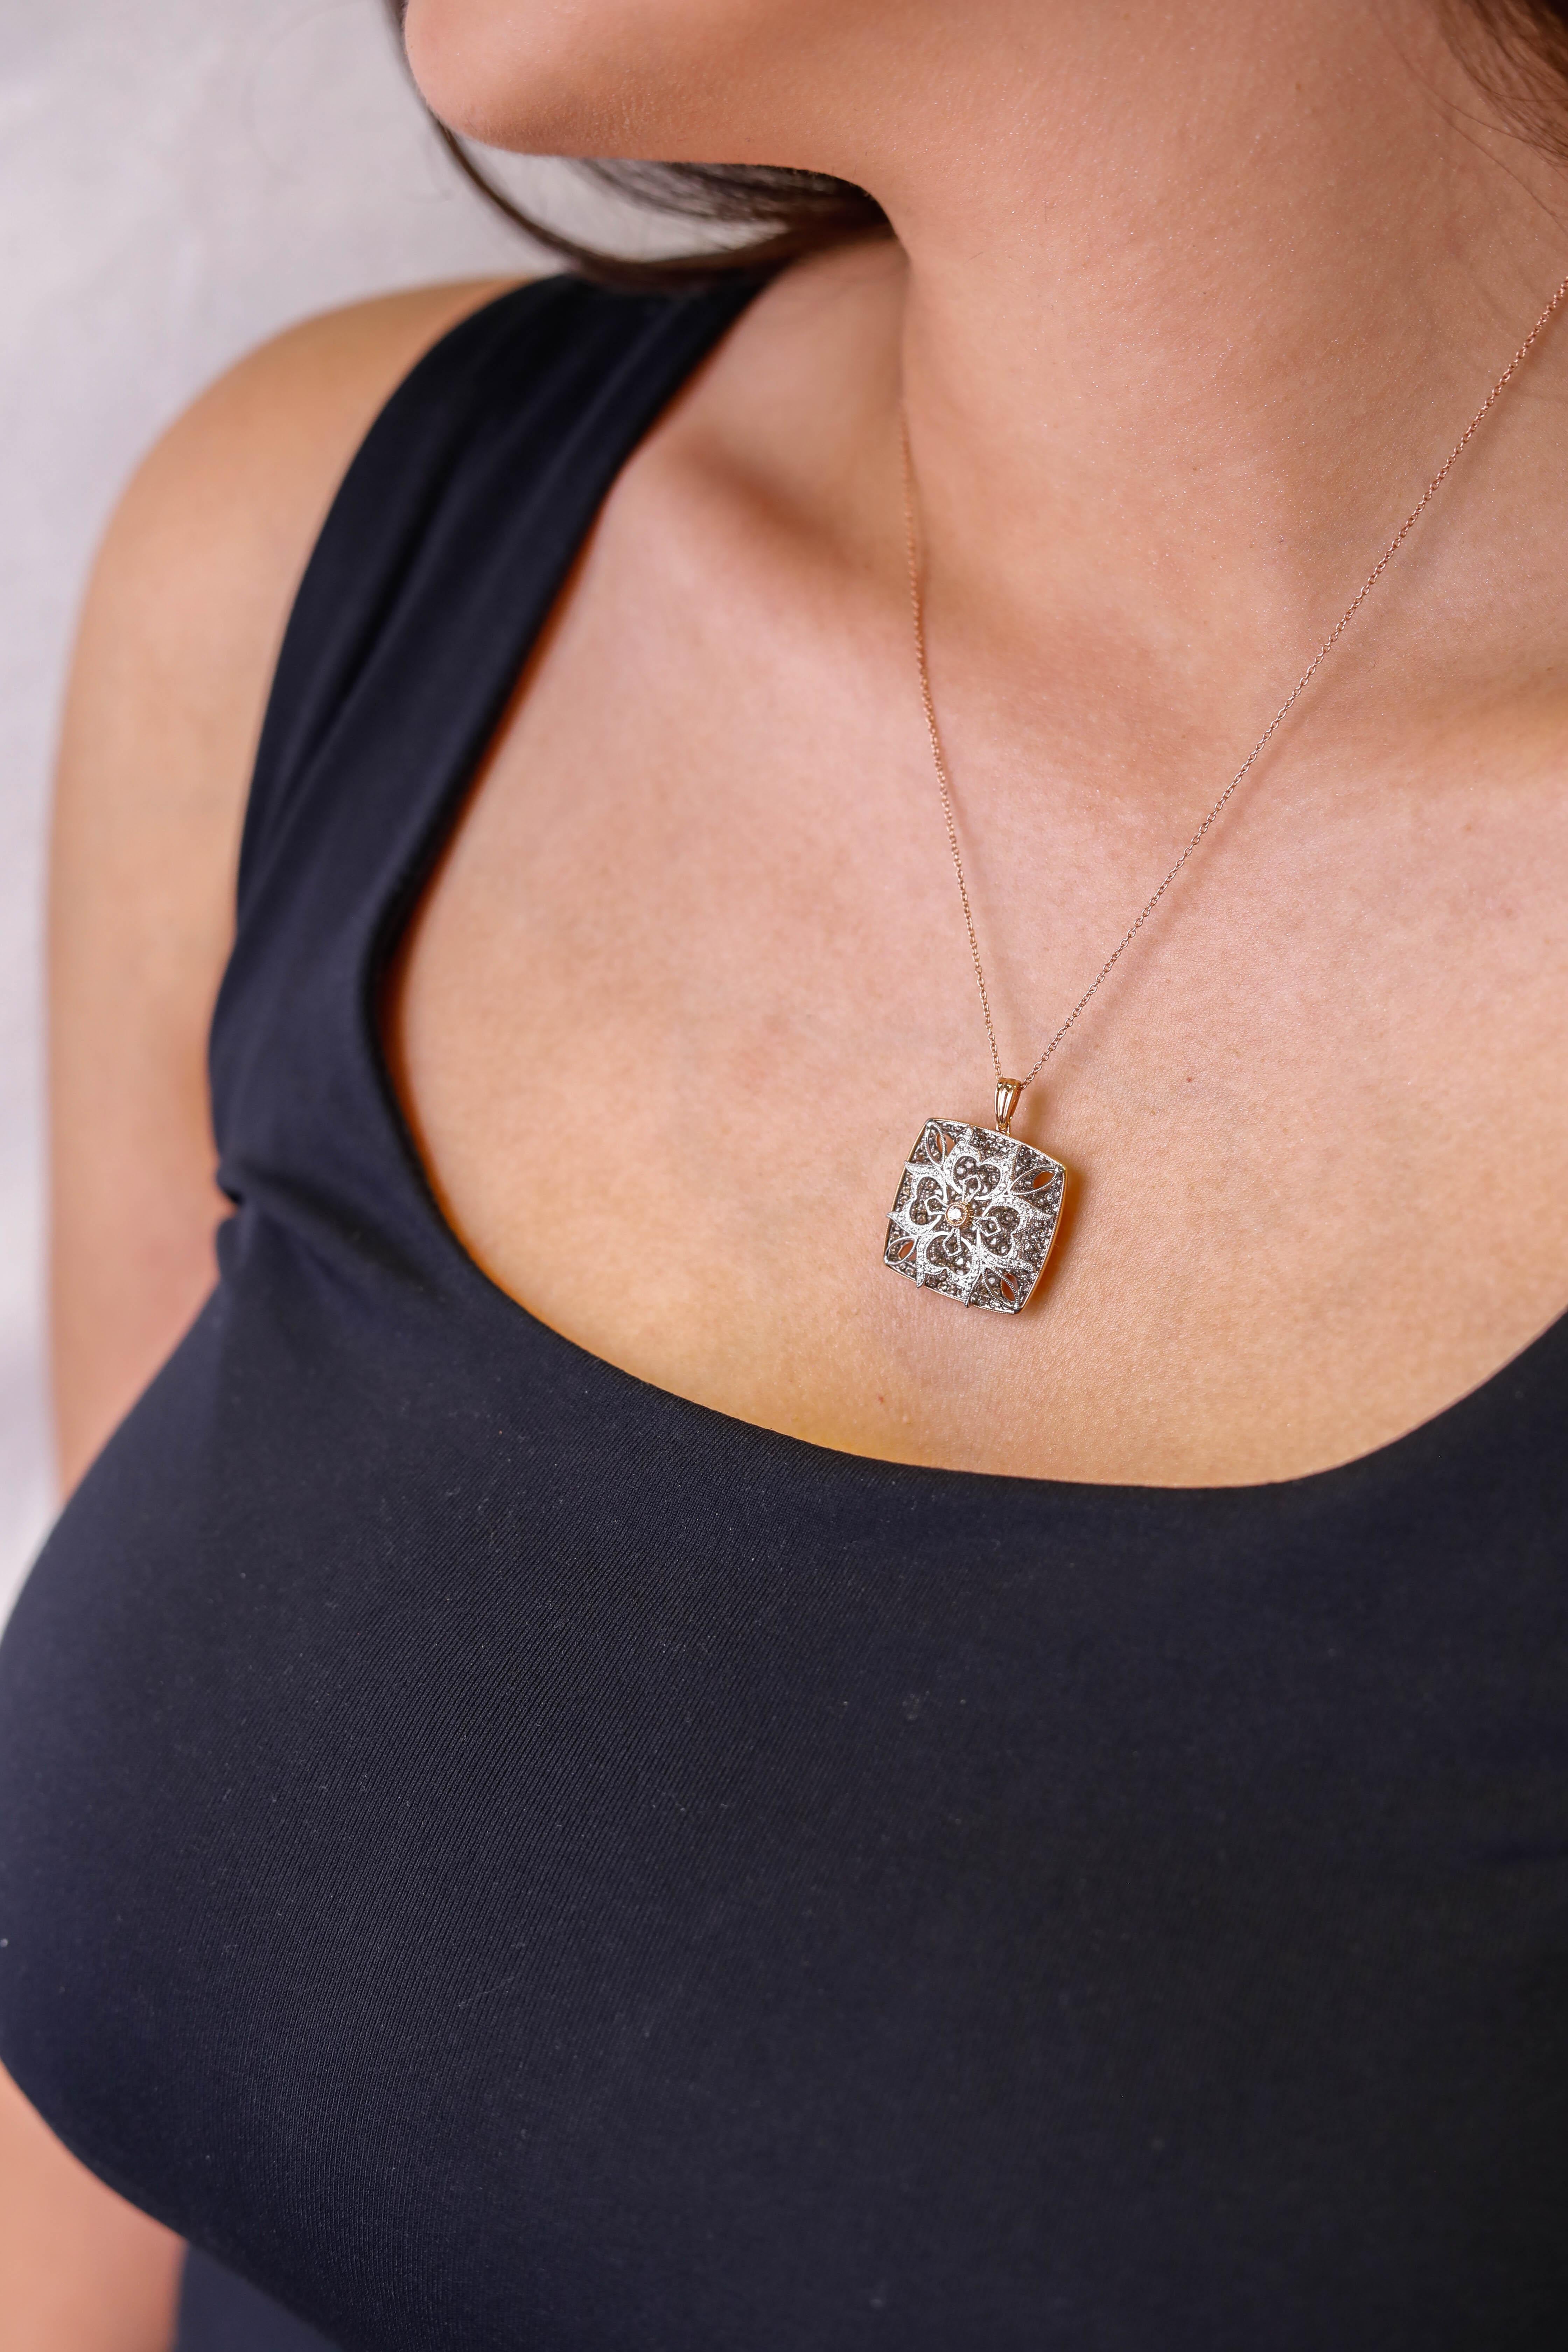 Modern 2.63 TCW White and Chocolate Diamond Pendant in 18 karat Gold by Gregg Ruth